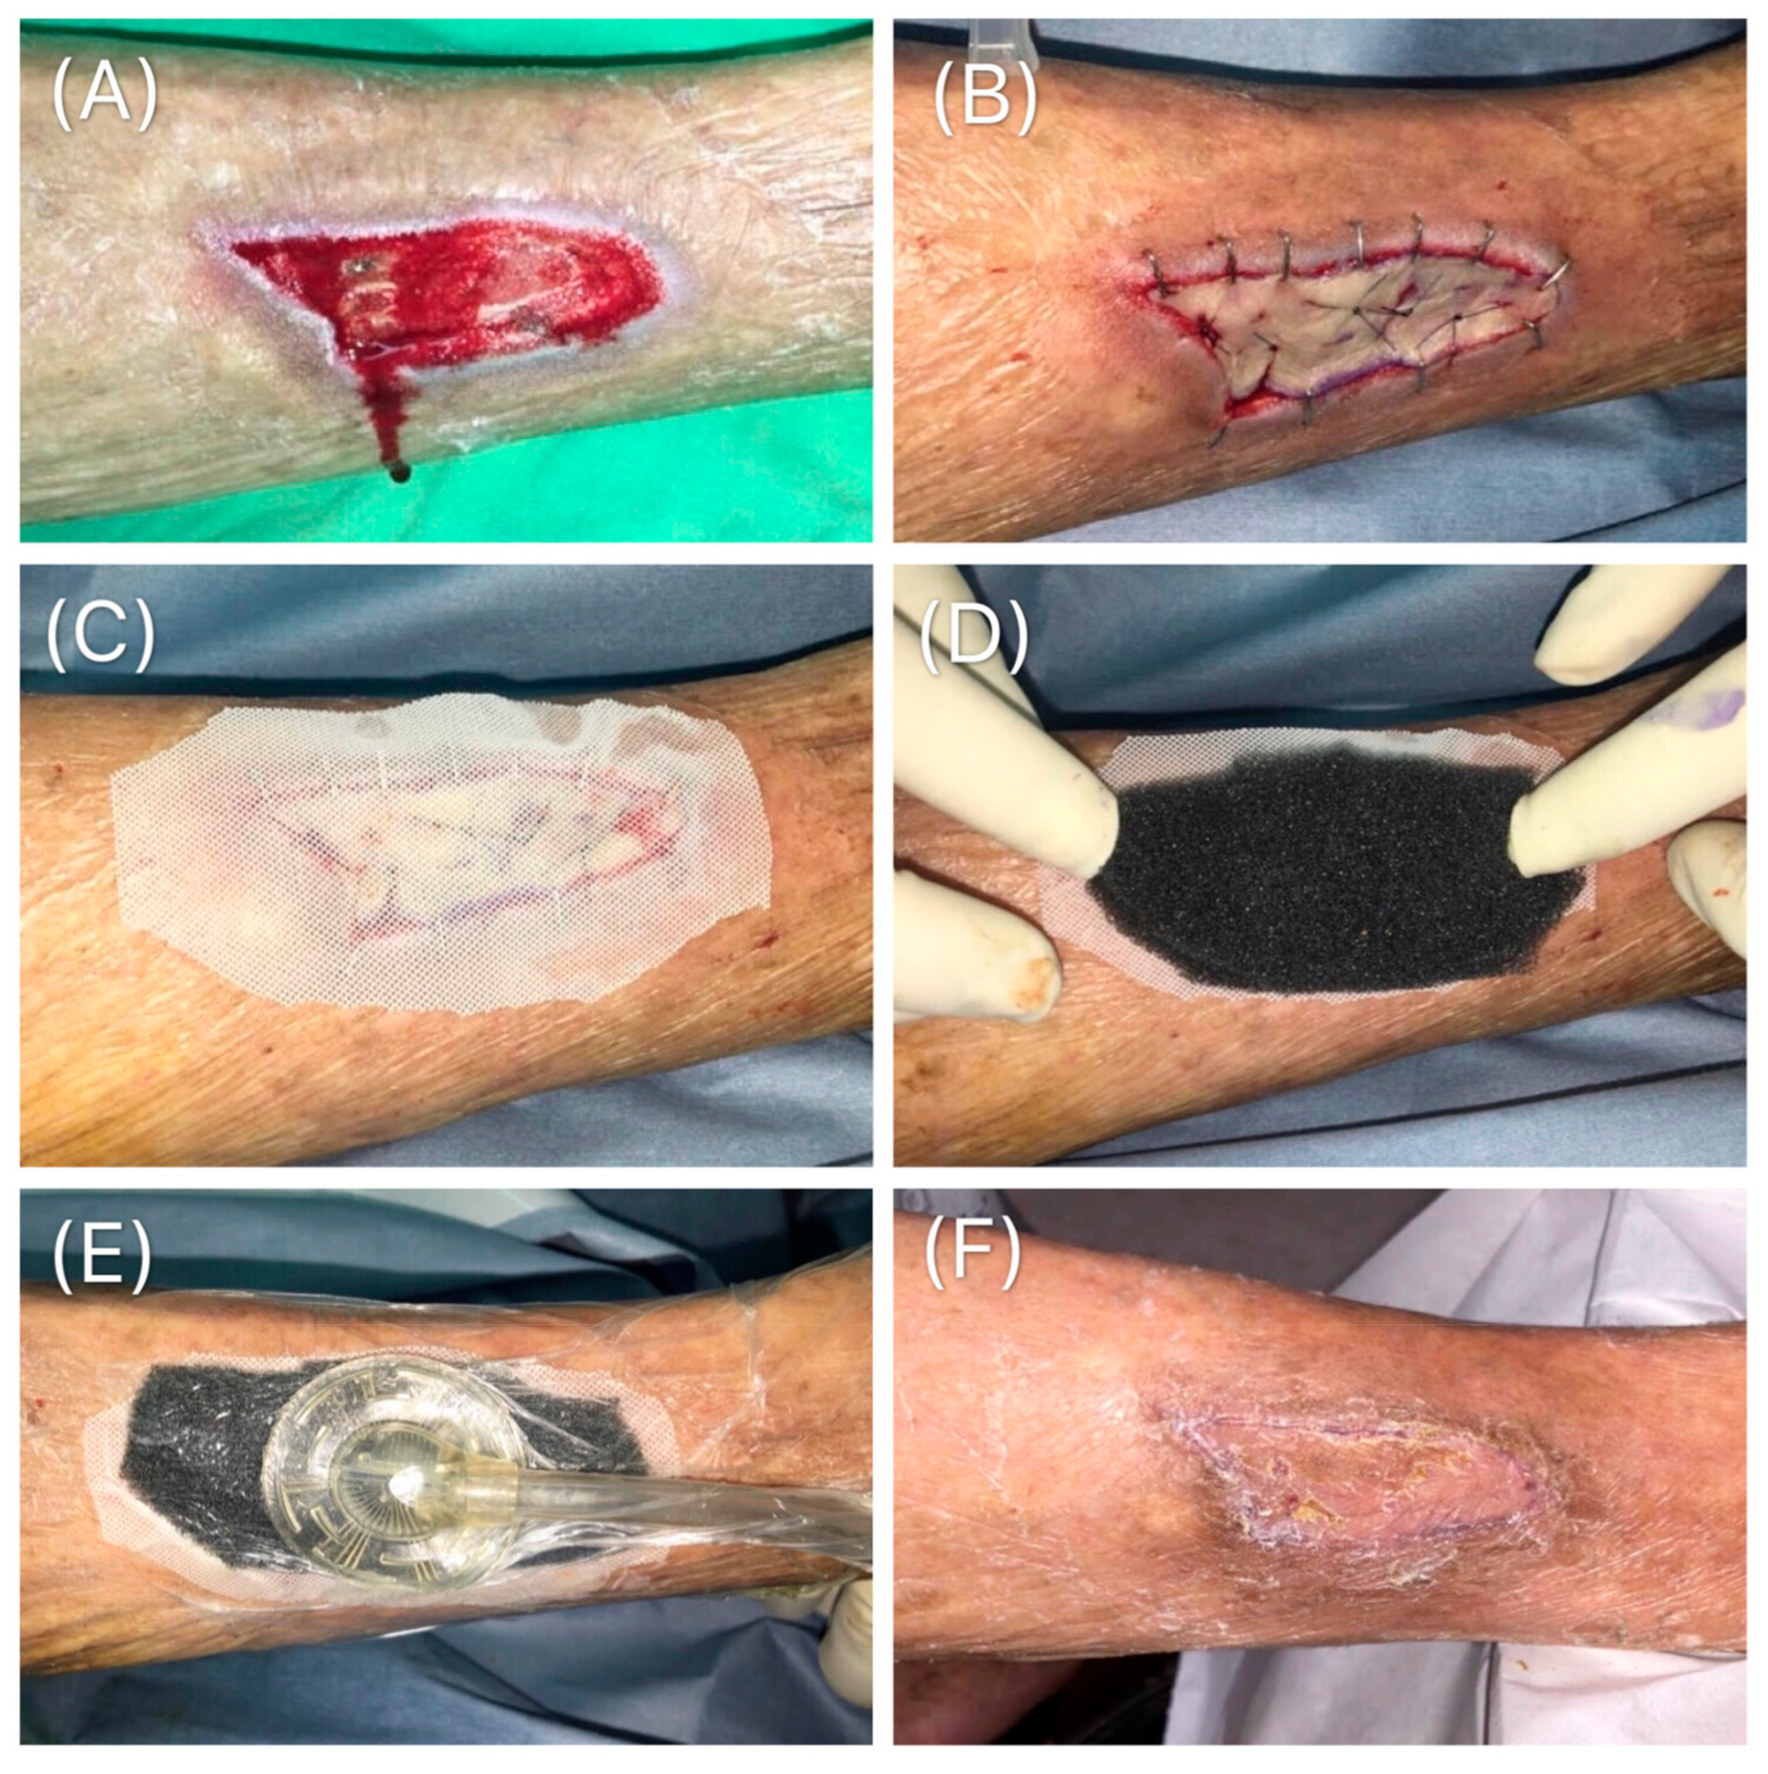 Medicina | Free Full-Text | Retrospective Study on the Clinical Superiority  of the Vacuum-Assisted Closure System with a Silicon-Based Dressing over  the Conventional Tie-over Bolster Technique in Skin Graft Fixation